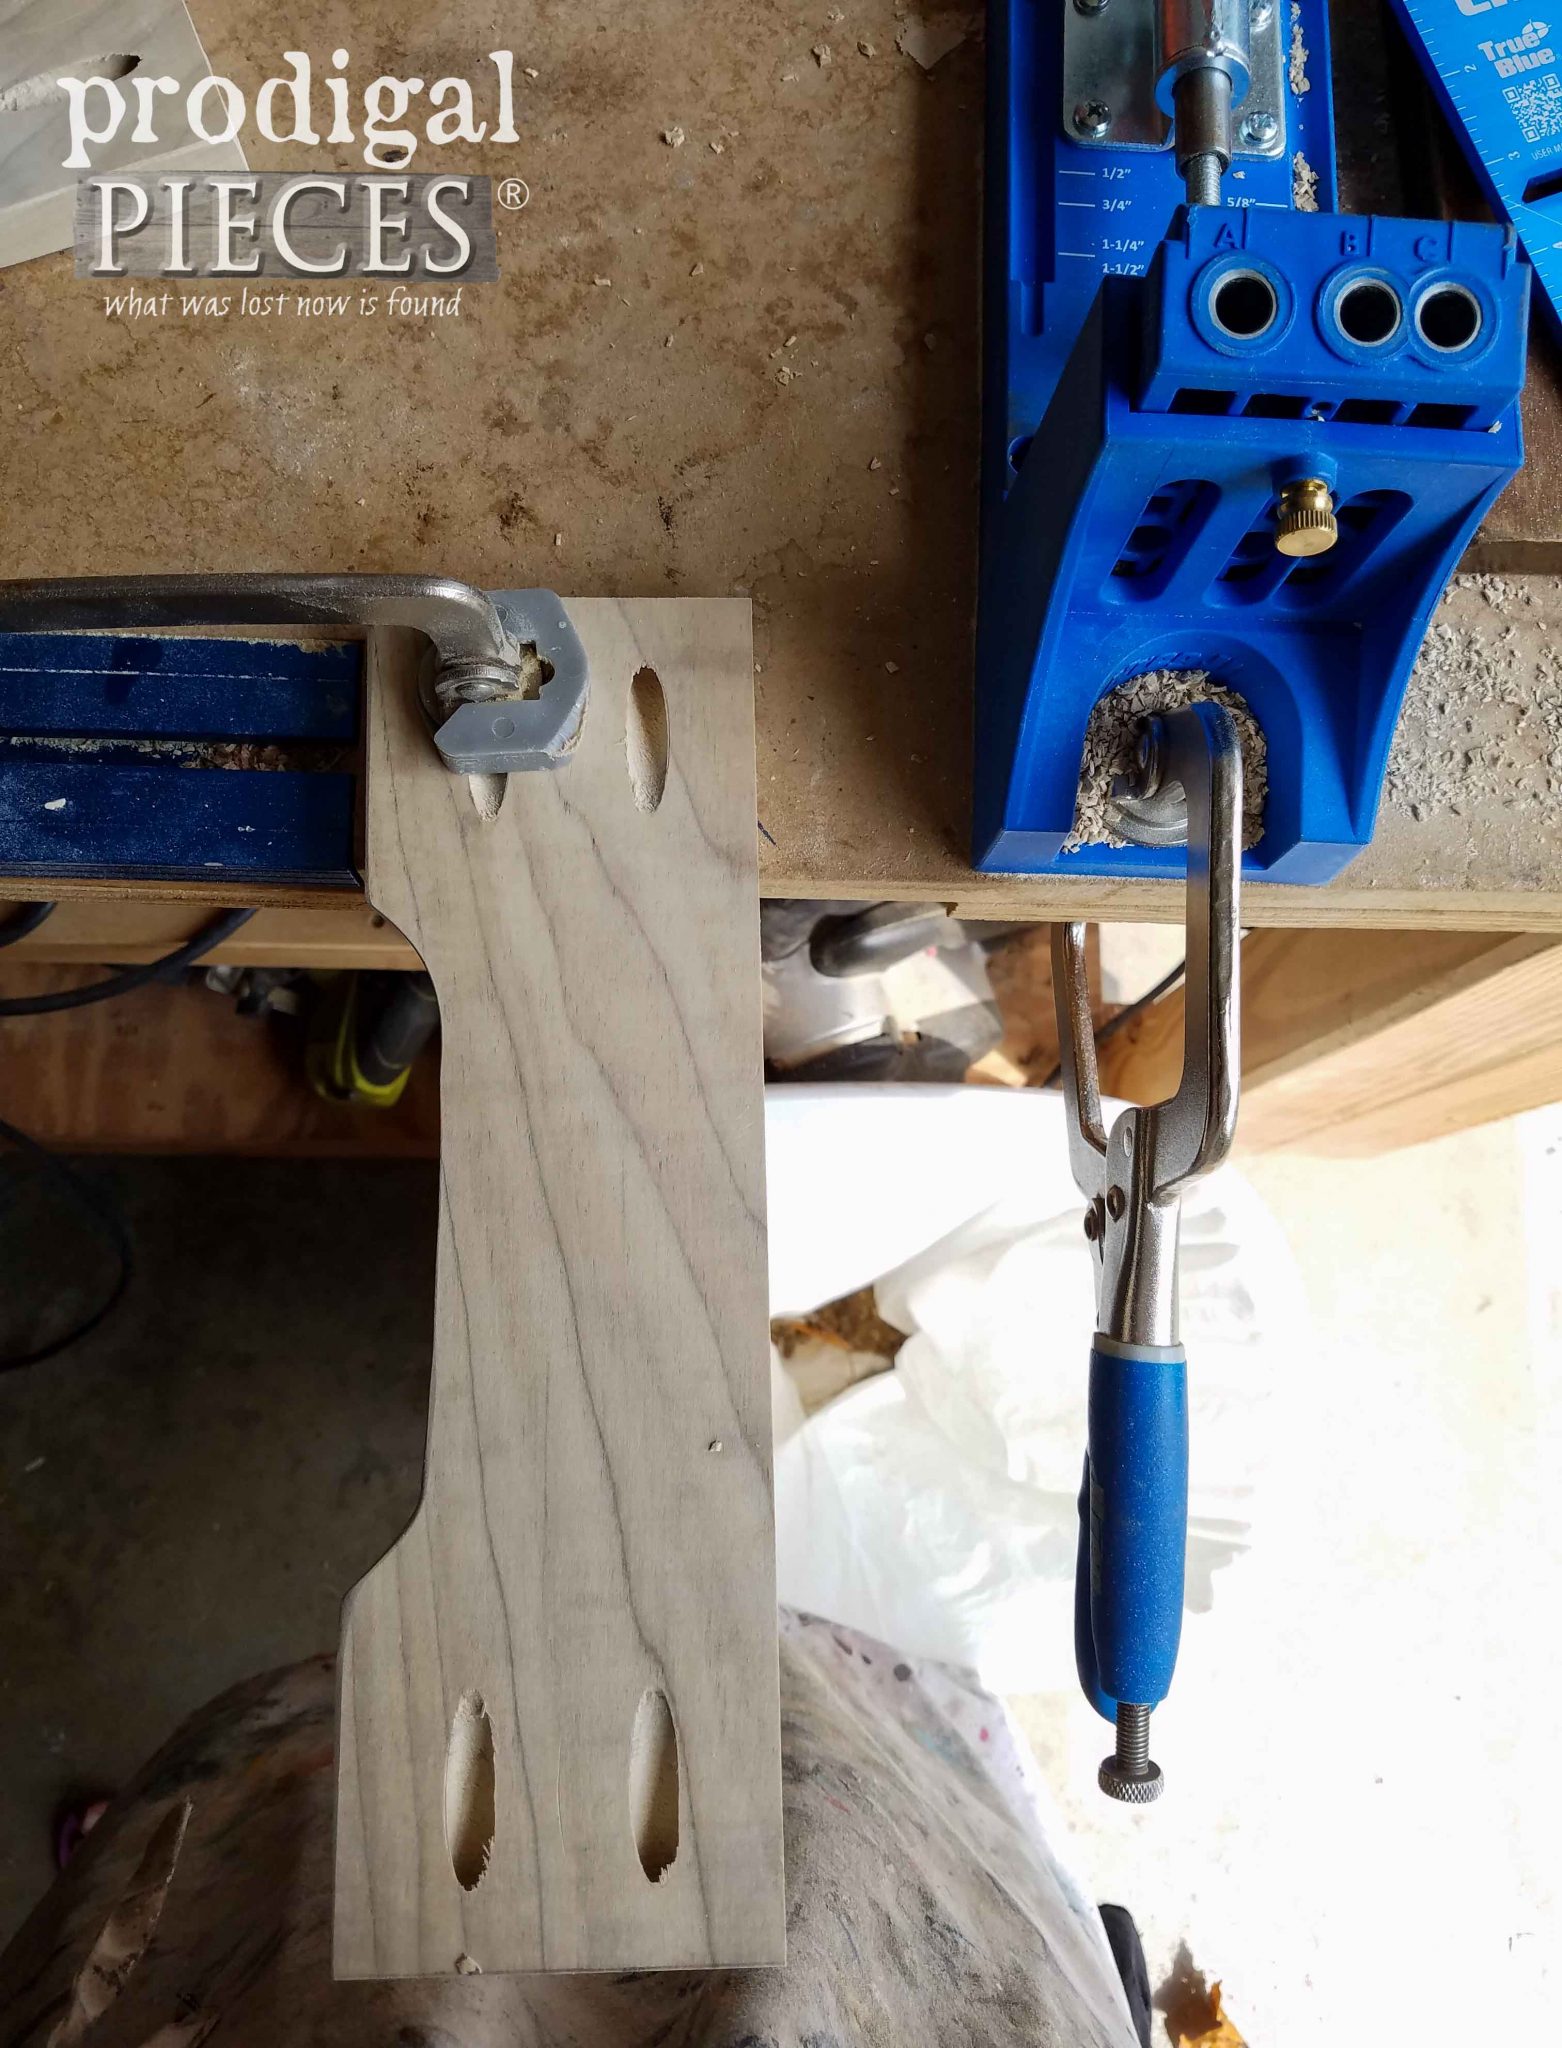 Kreg JIg Pocket Holes and Clamp Trak for Woodworking Repurposed Piano Bench Prodigal Pieces | prodigalpieces.com